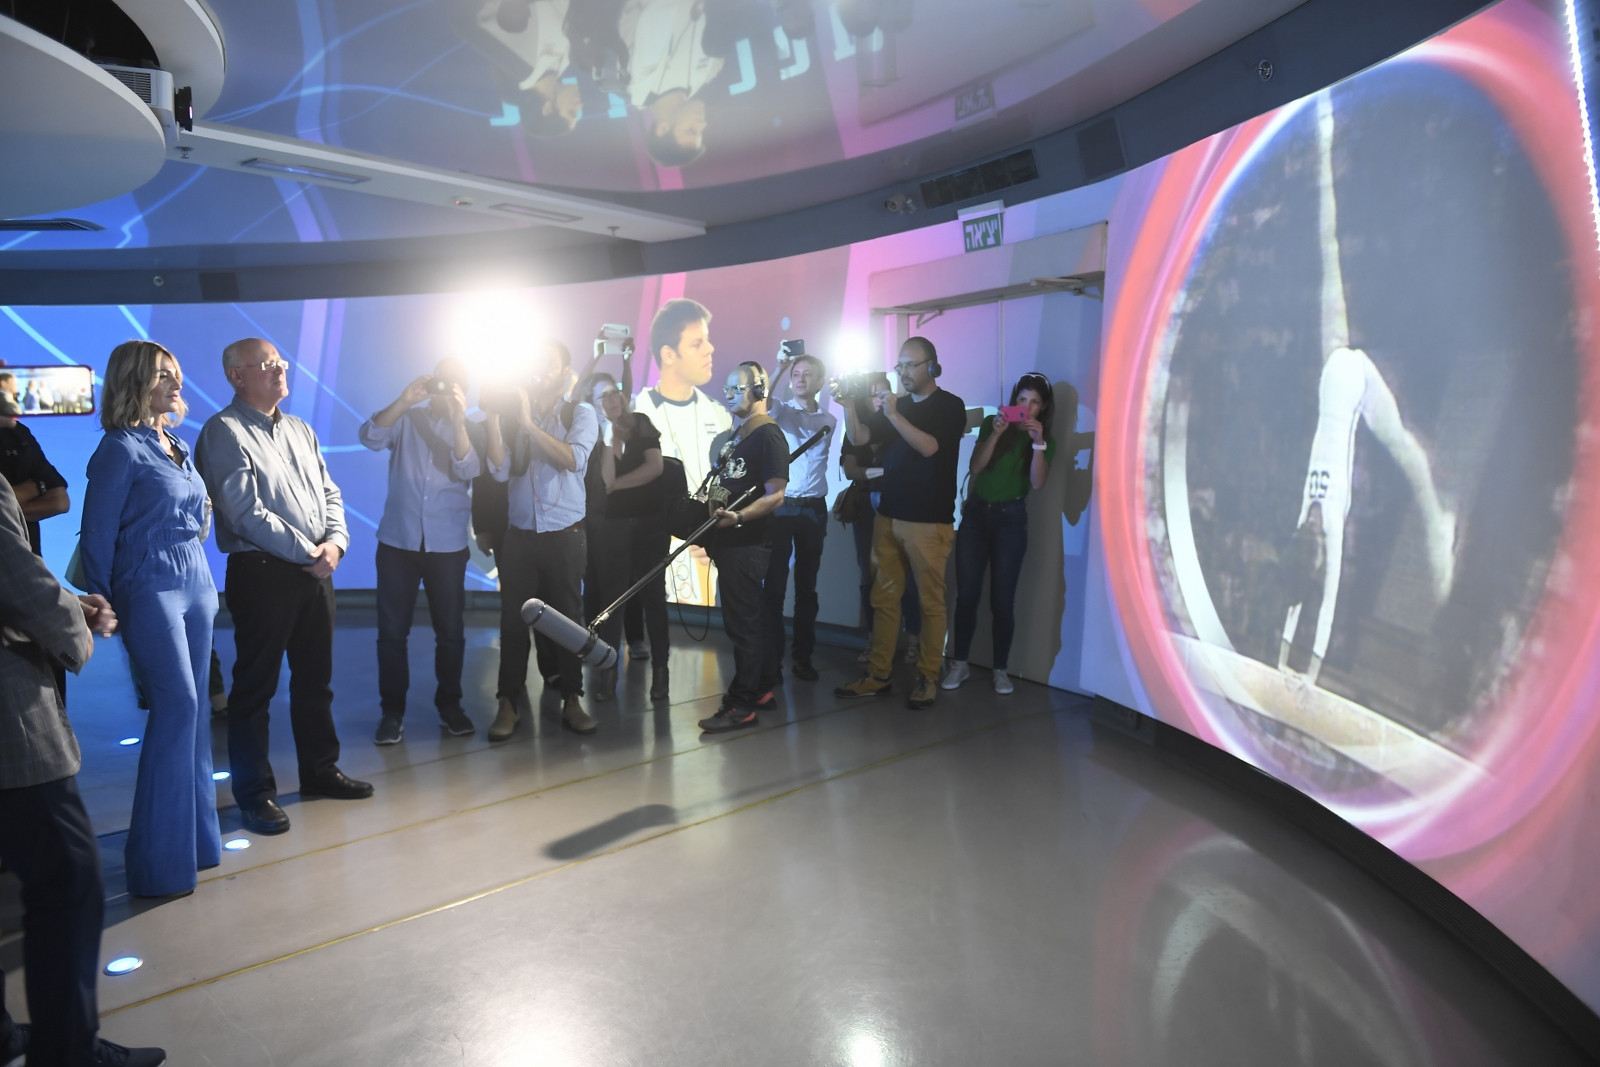 Nadia Comăneci had a tour of the OCI's Olympic Museum during the visit ©OCI